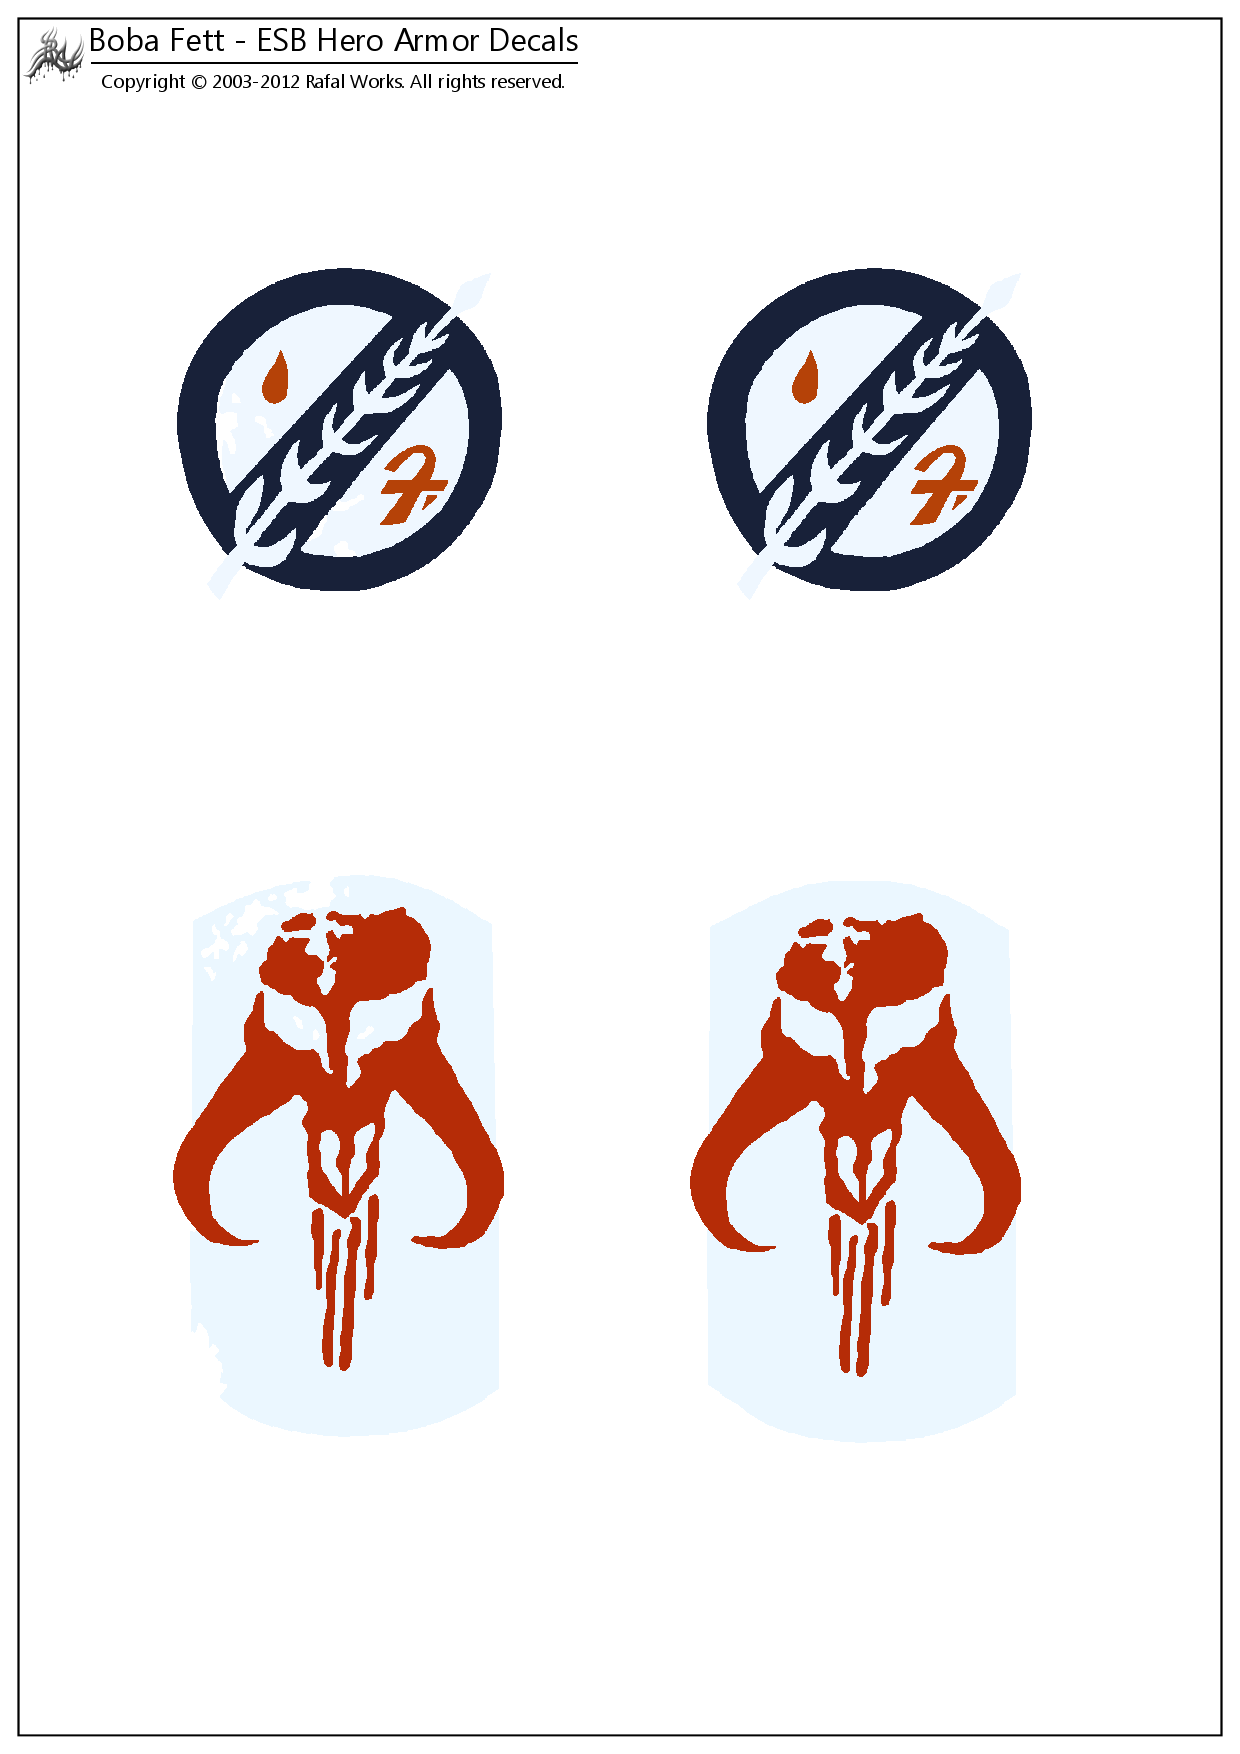 ESB Armor Decals A4.png